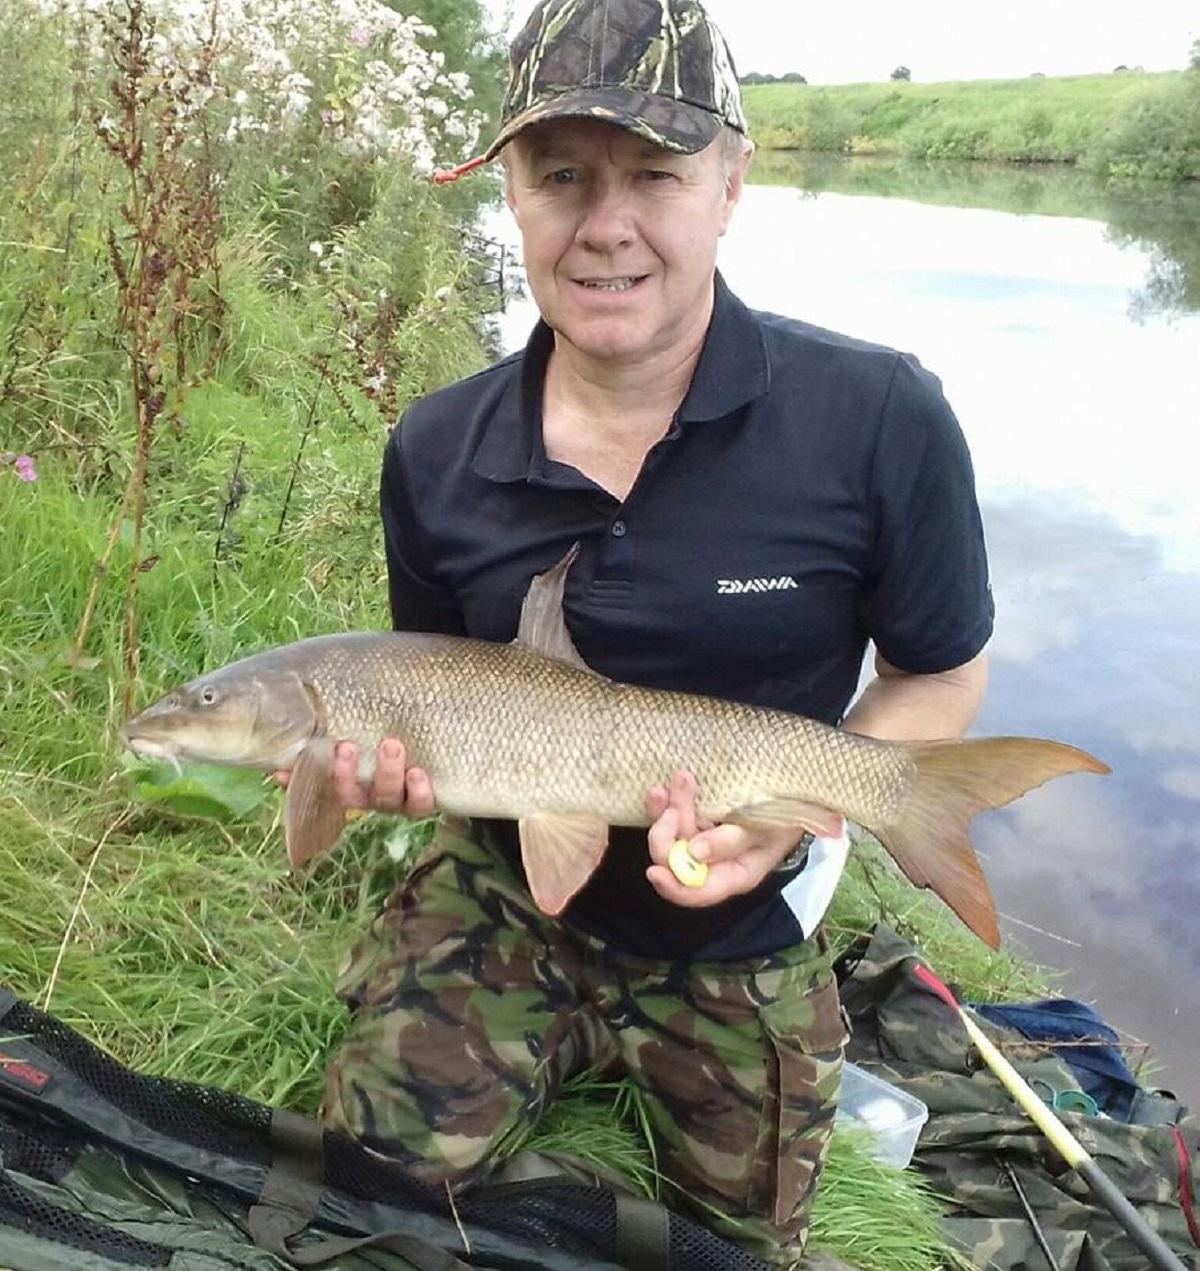 Angling Lines from our local clubs